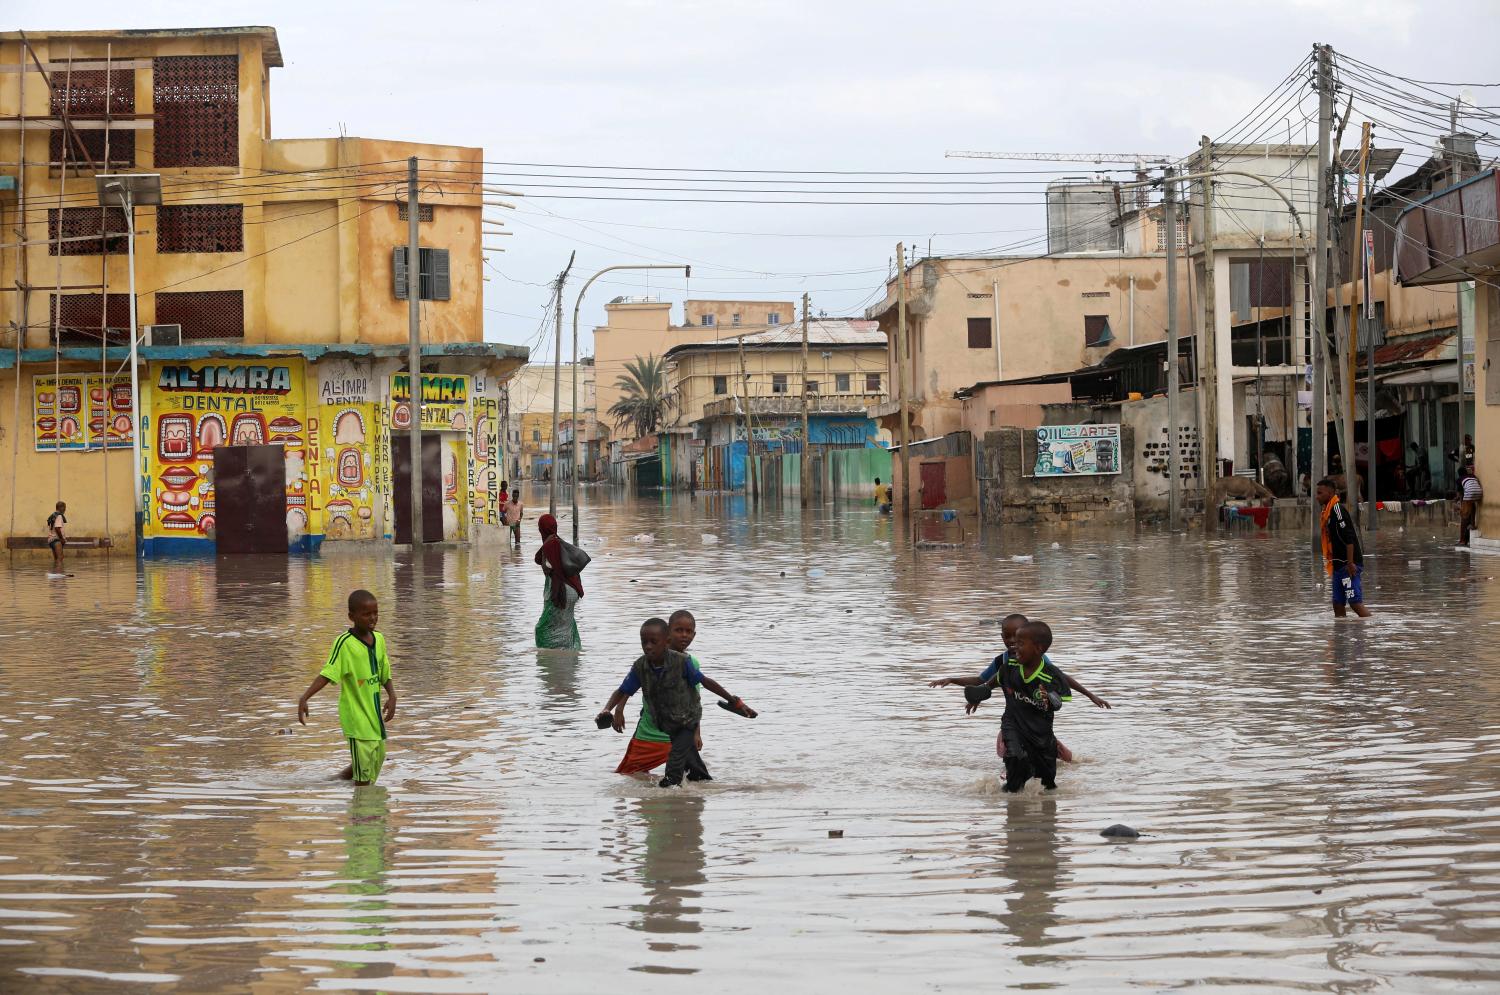 FILE PHOTO: Children play in a flooded street in Hamerweyne district of Mogadishu, Somalia May 20, 2018. REUTERS/Feisal Omar/File Photo